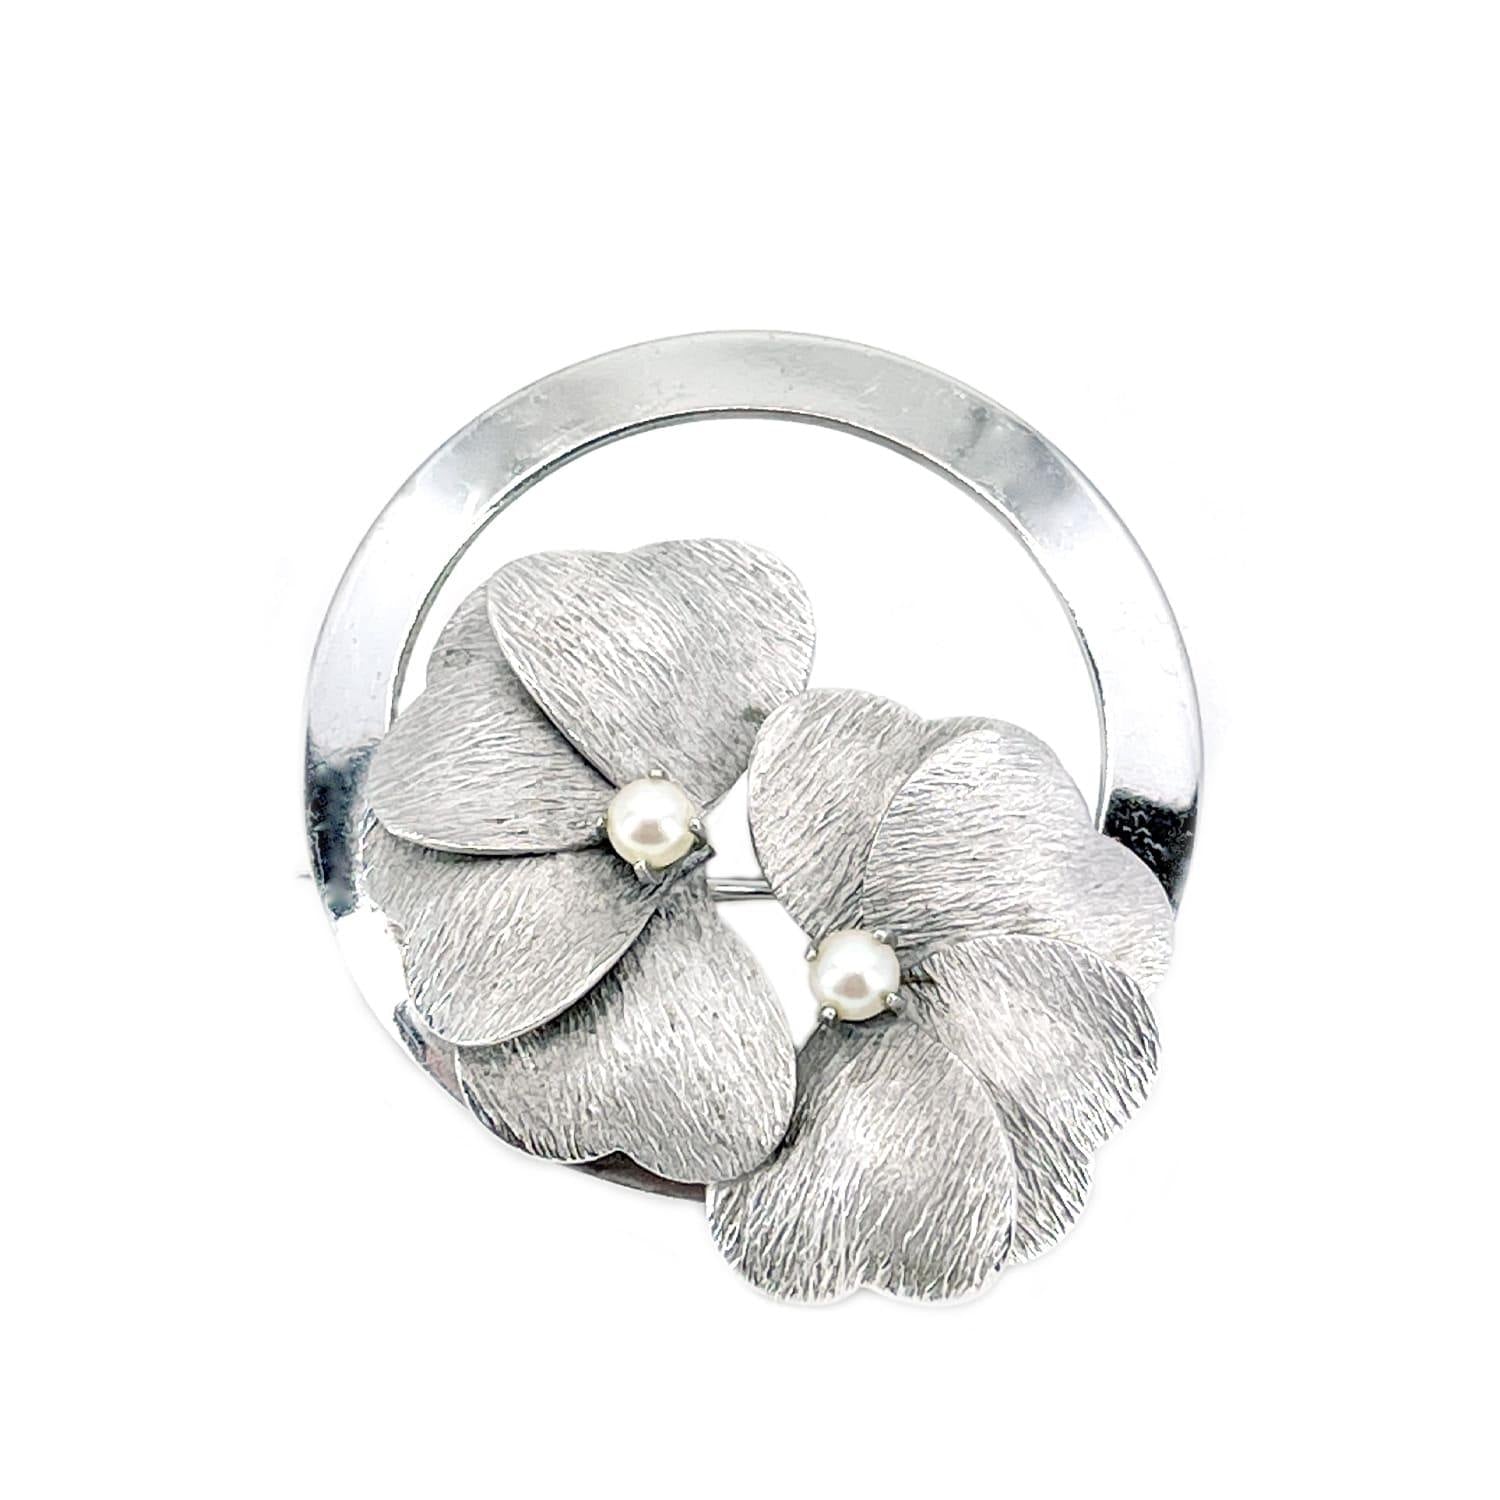 Binder Brothers Japanese Saltwater Cultured Akoya Pearl Pansy Brooch- Sterling Silver